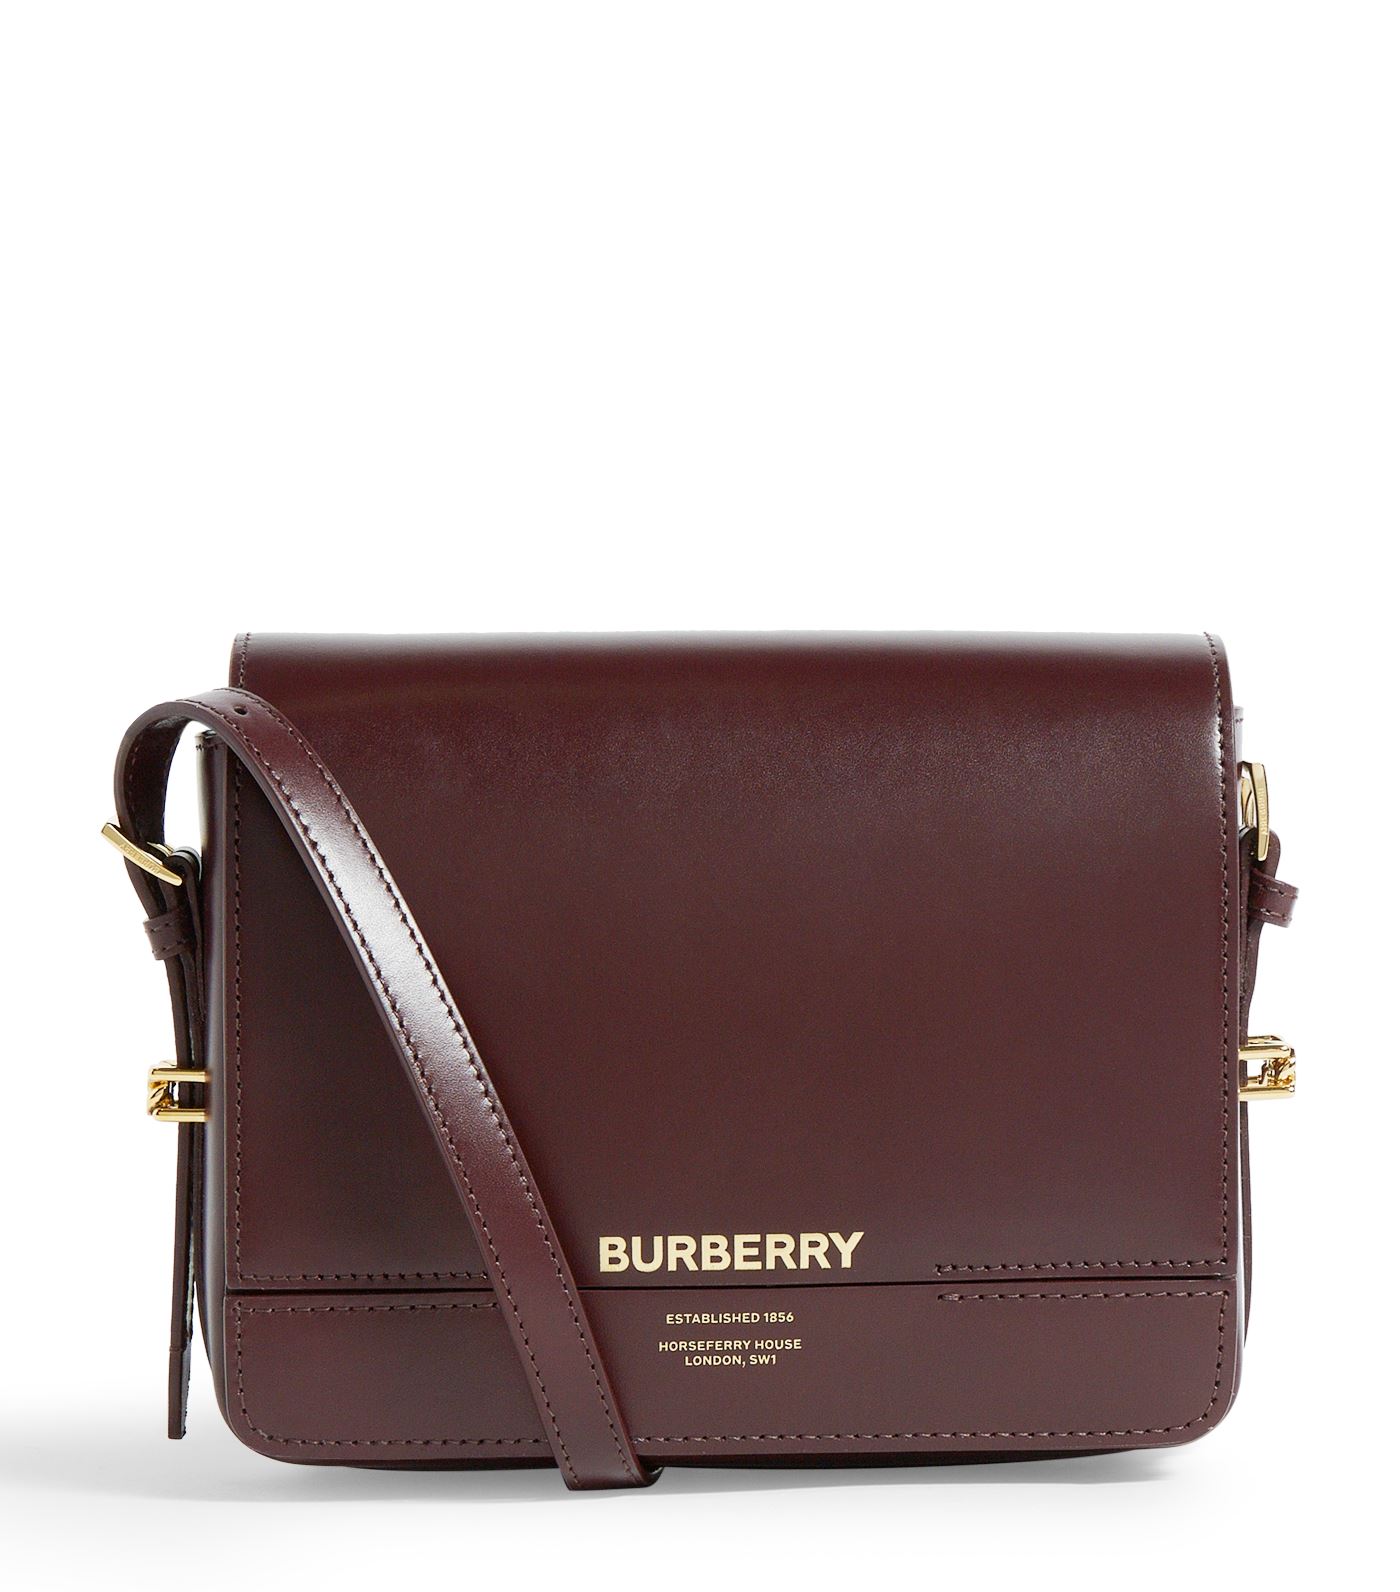 Burberry - Adopting a structured silhouette with unique front-fold detail, the Burberry Grace bag br